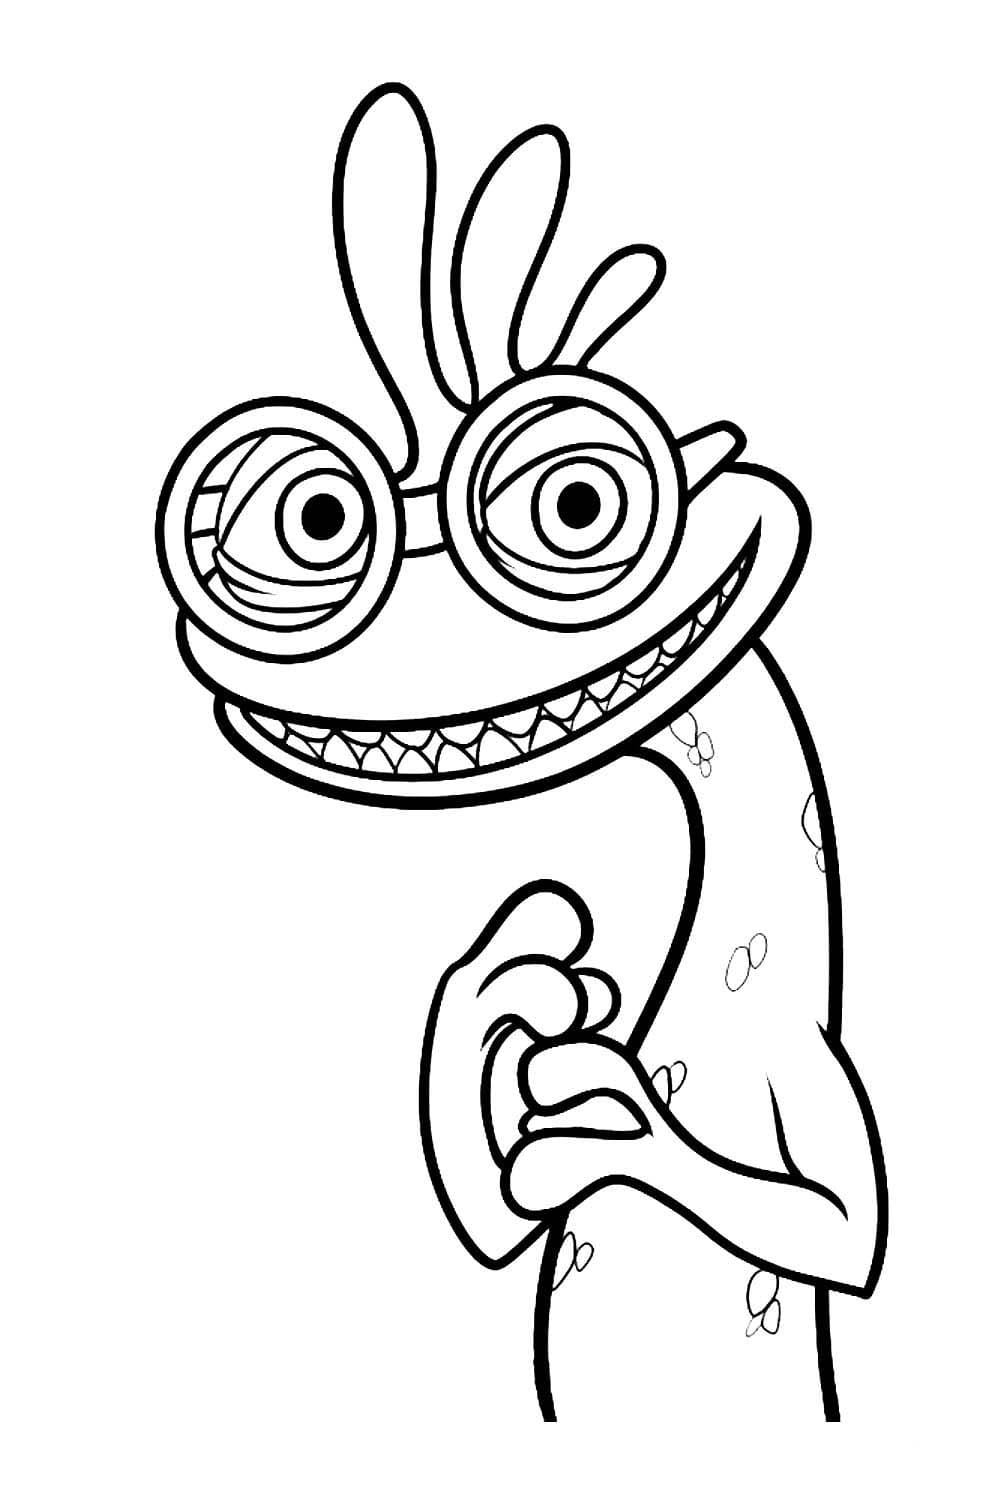 Monsters inc. Coloring Pages